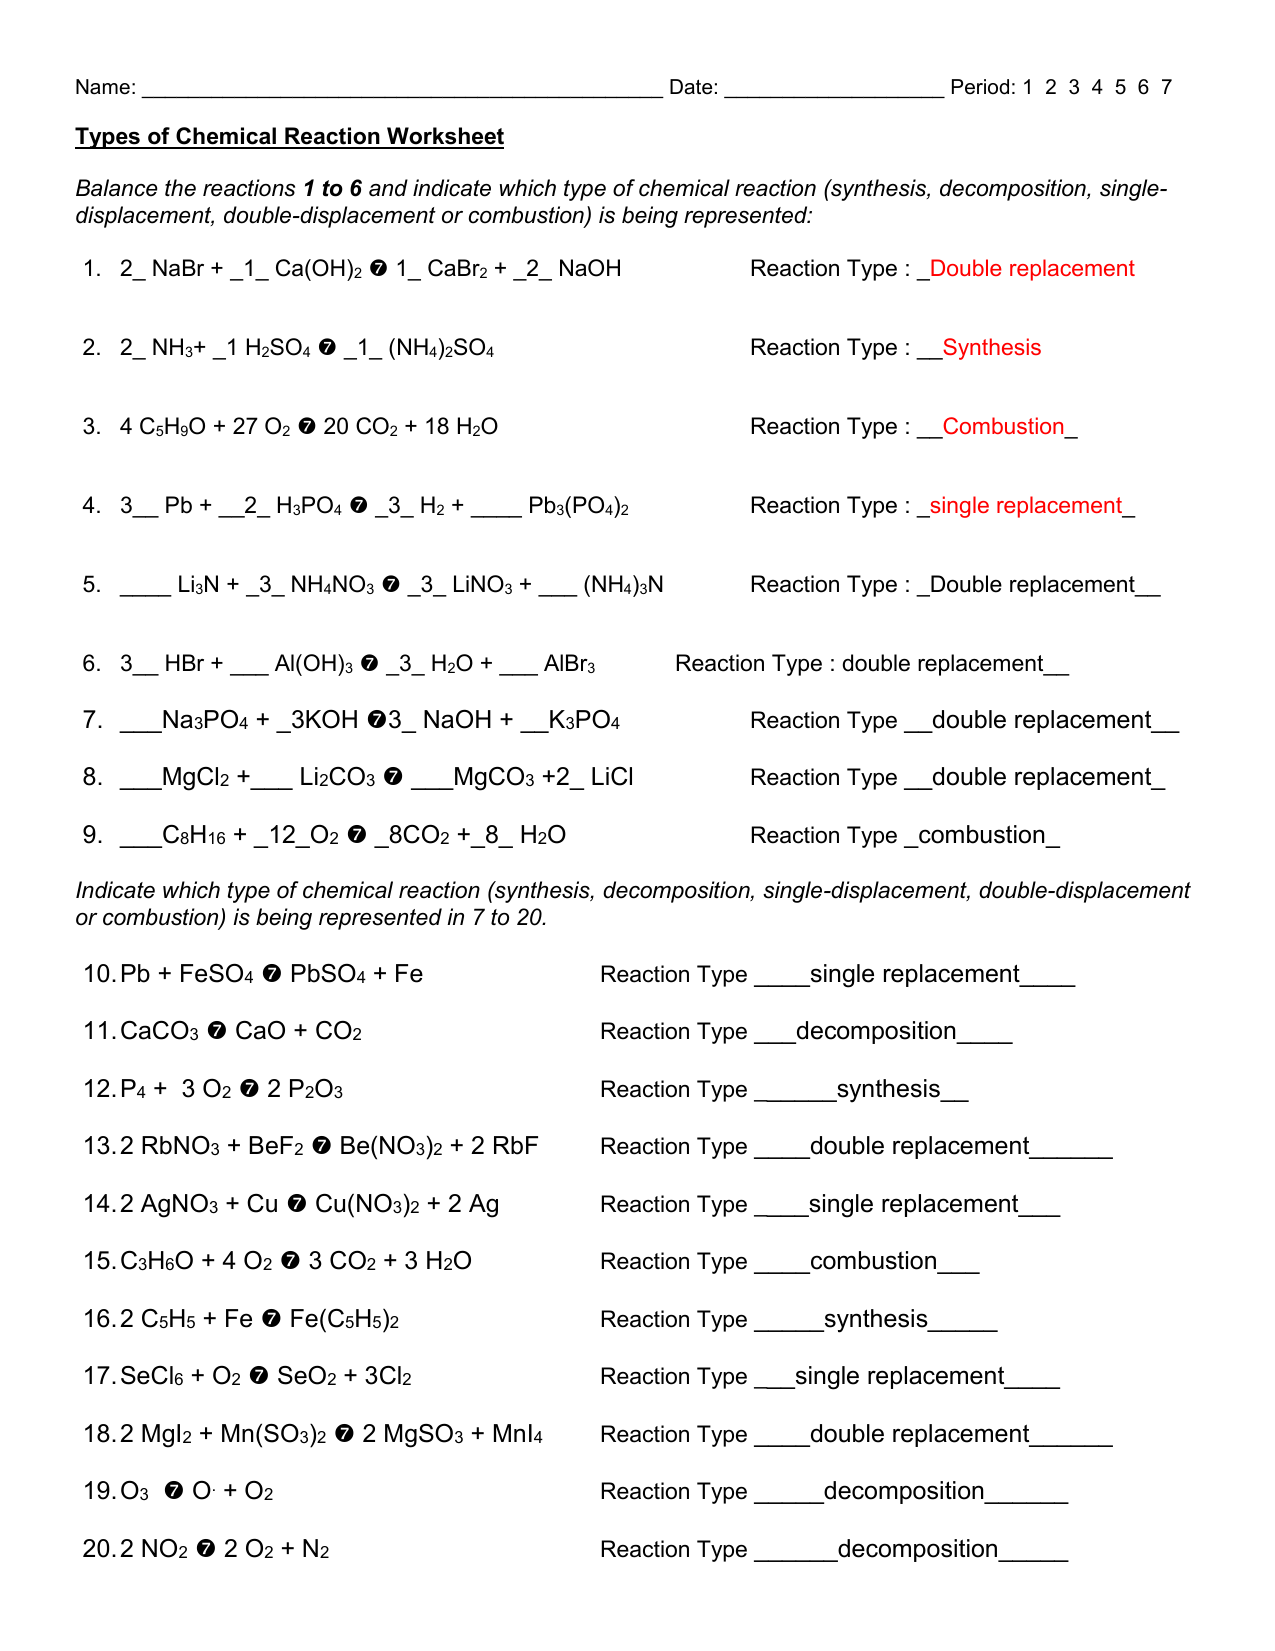 Types of Chemical Reaction Worksheetanswers Regarding Types Of Reactions Worksheet Answers